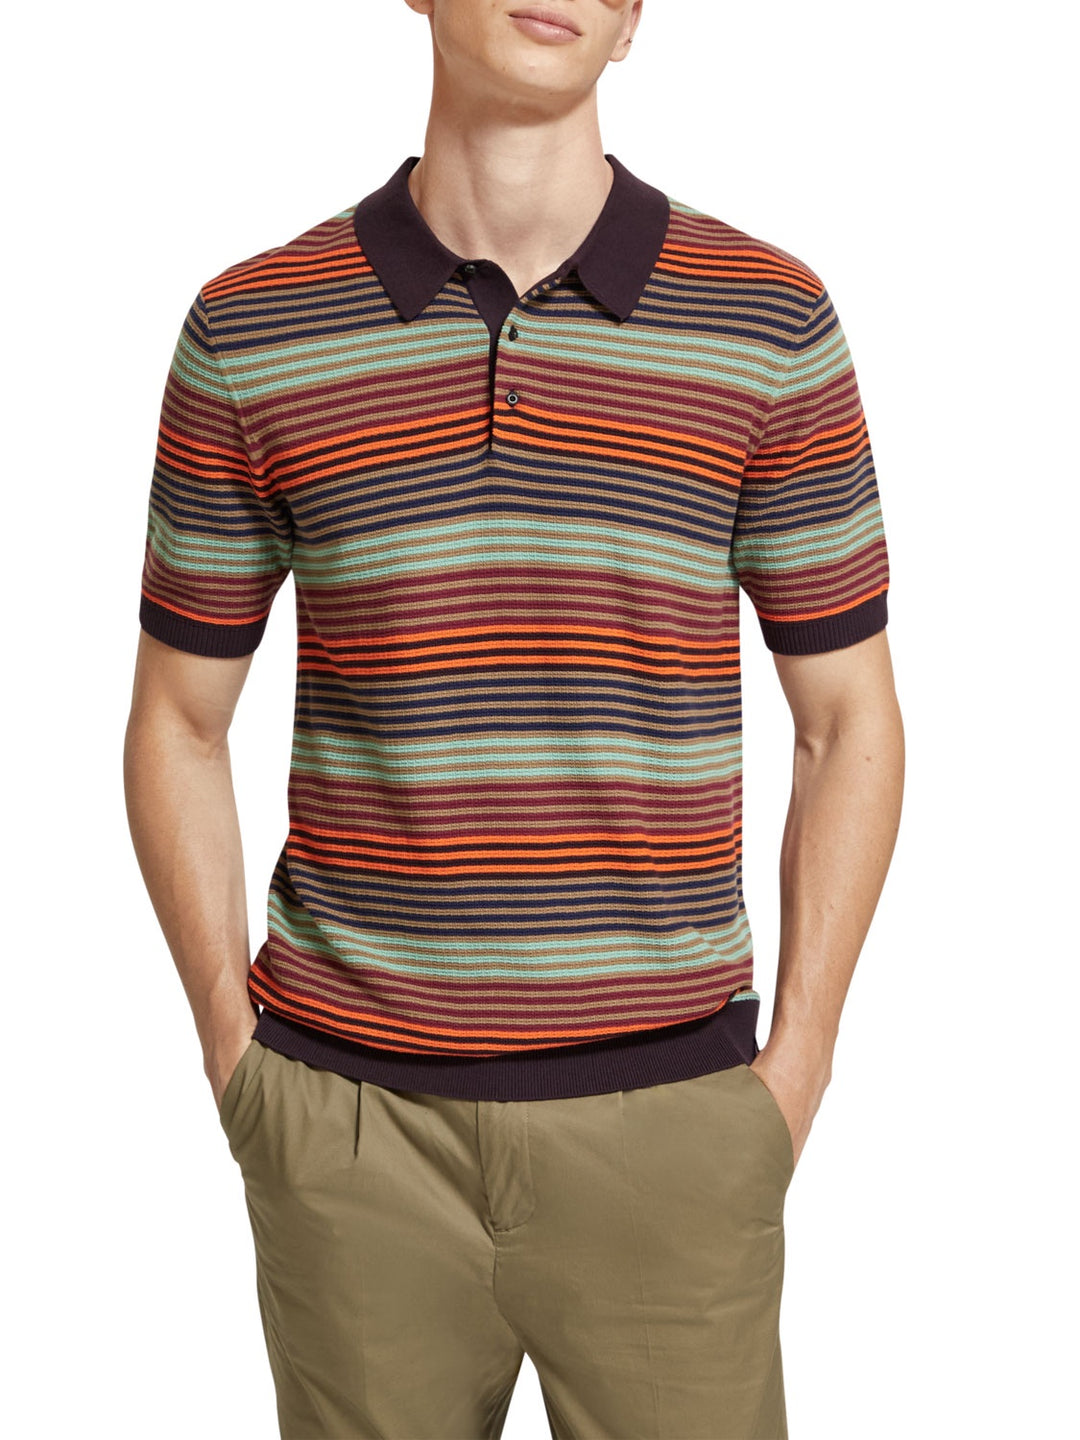 Scotch & Soda - Knitted Striped Polo in Multi Stripe | Buster McGee